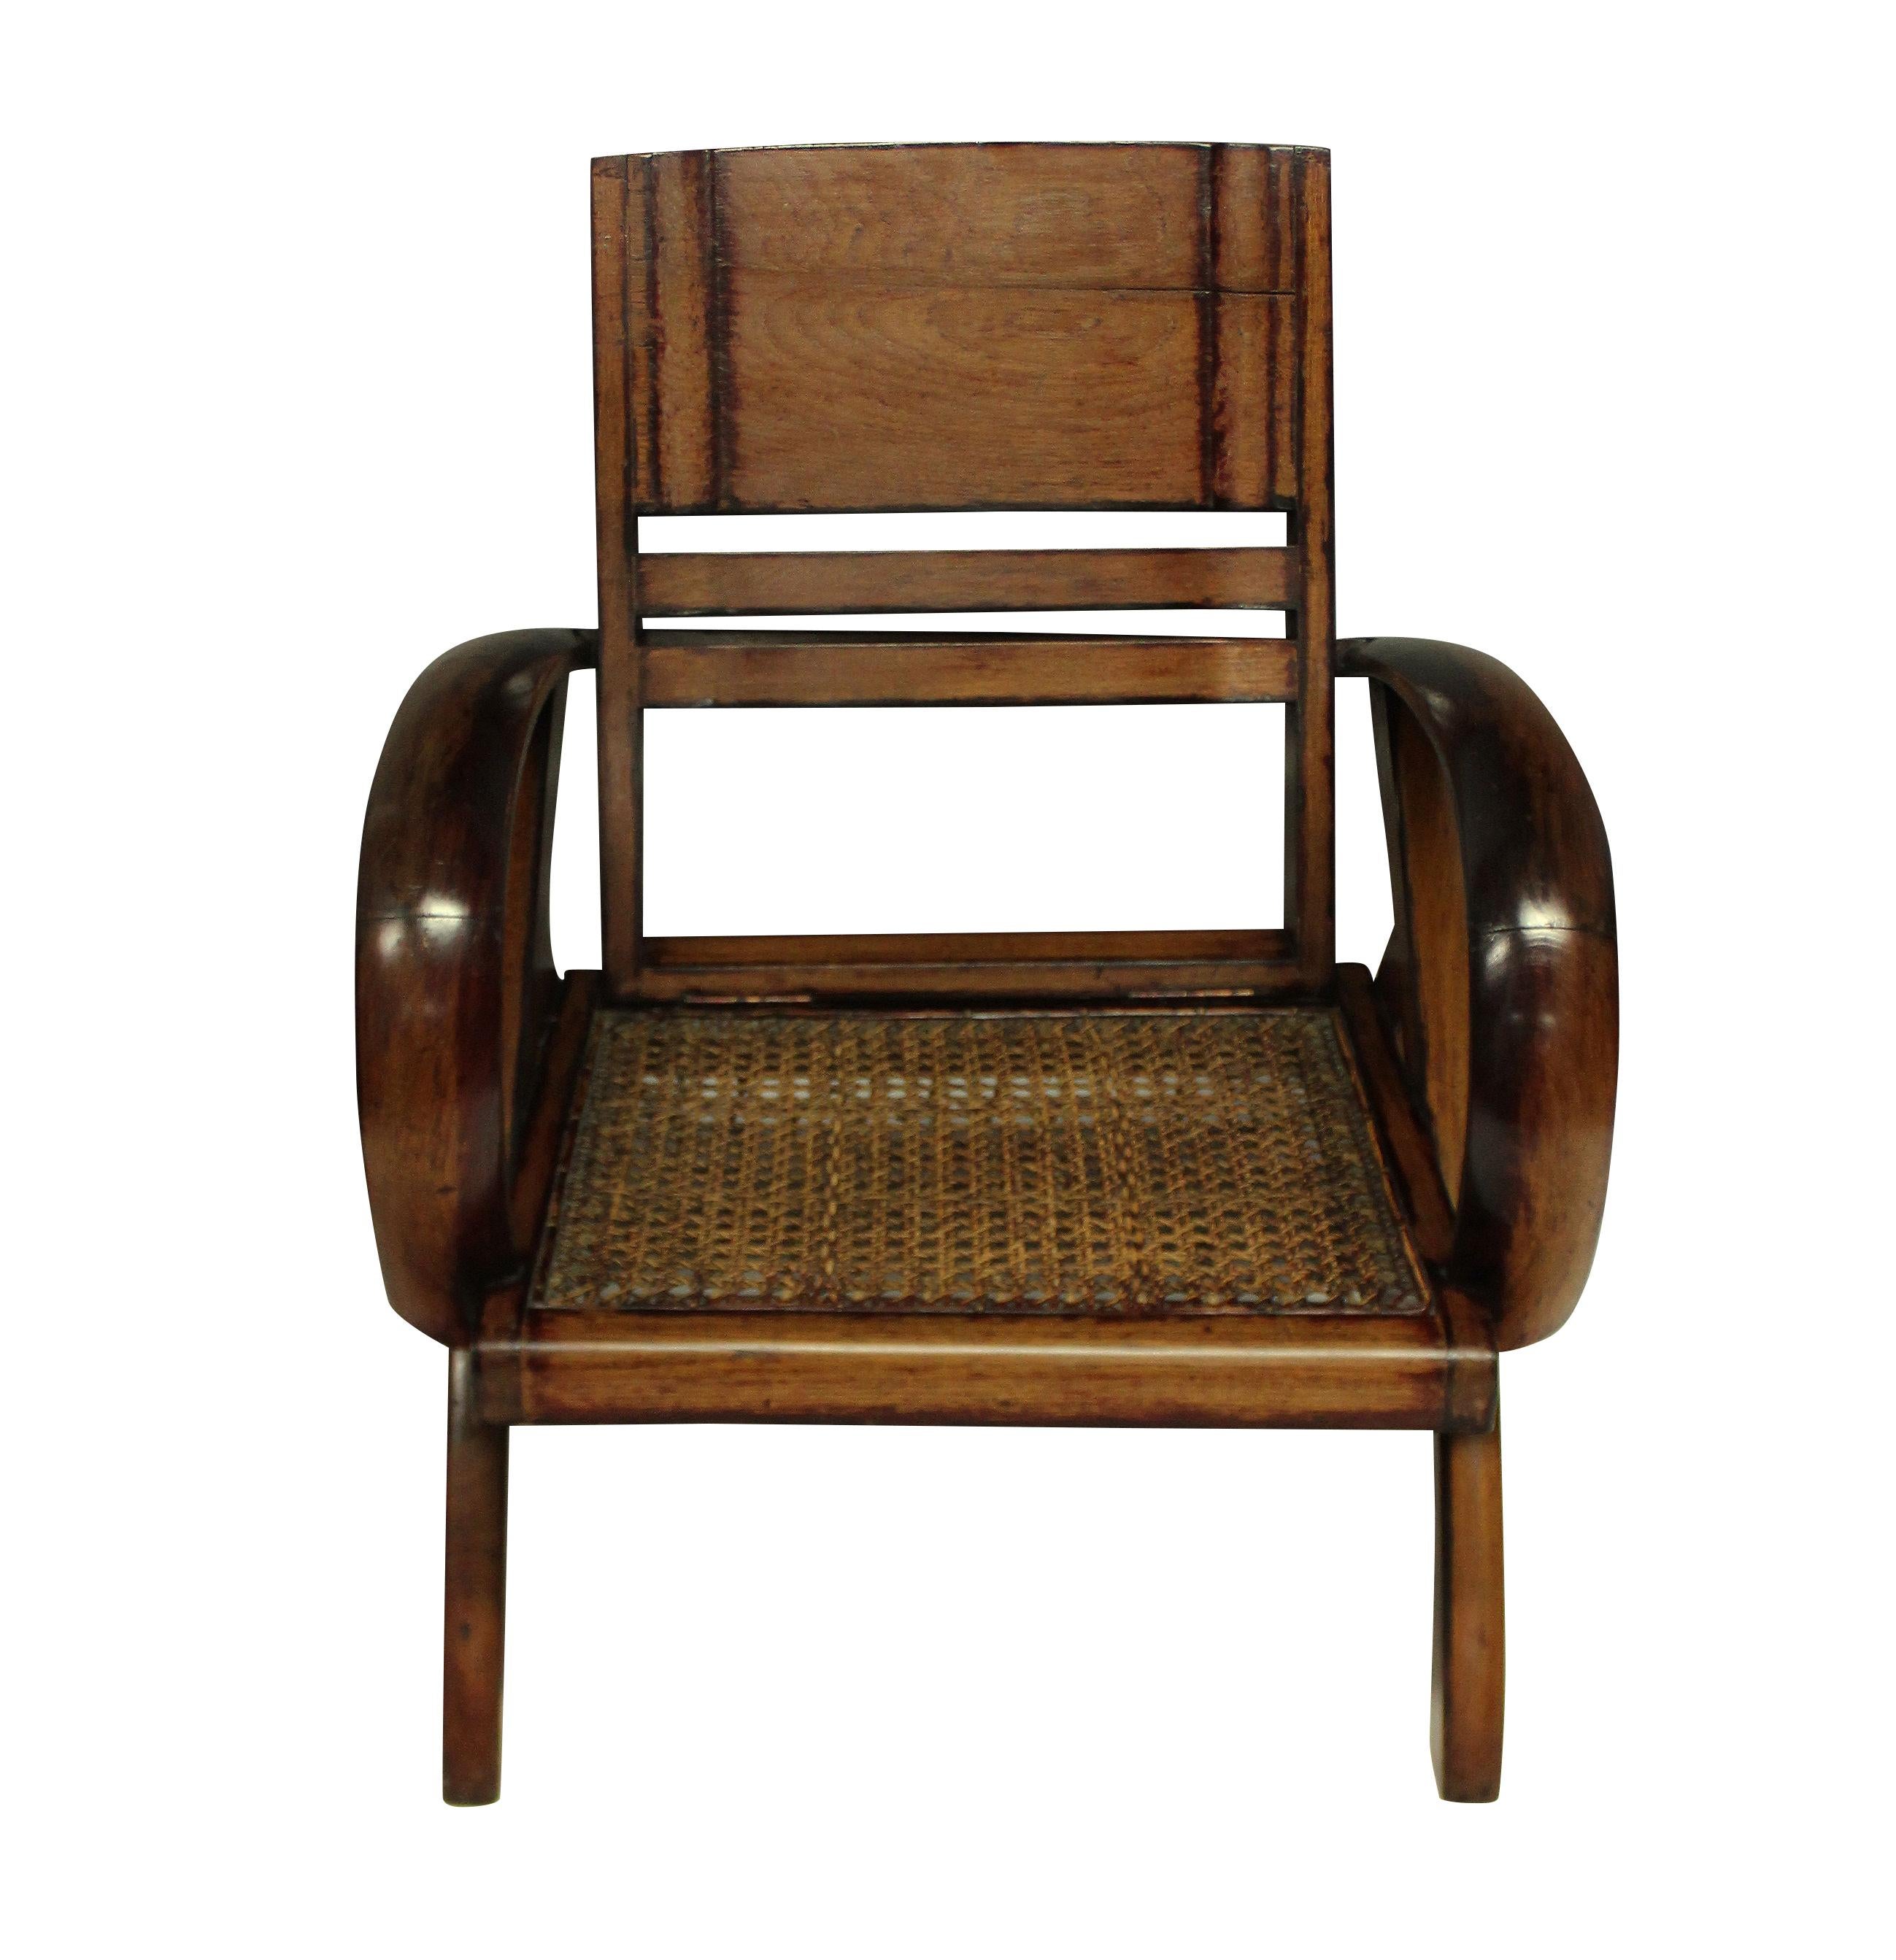 A pair of French Colonial Art Deco planter chairs, in stained teak, with cane seats. Vietnam.